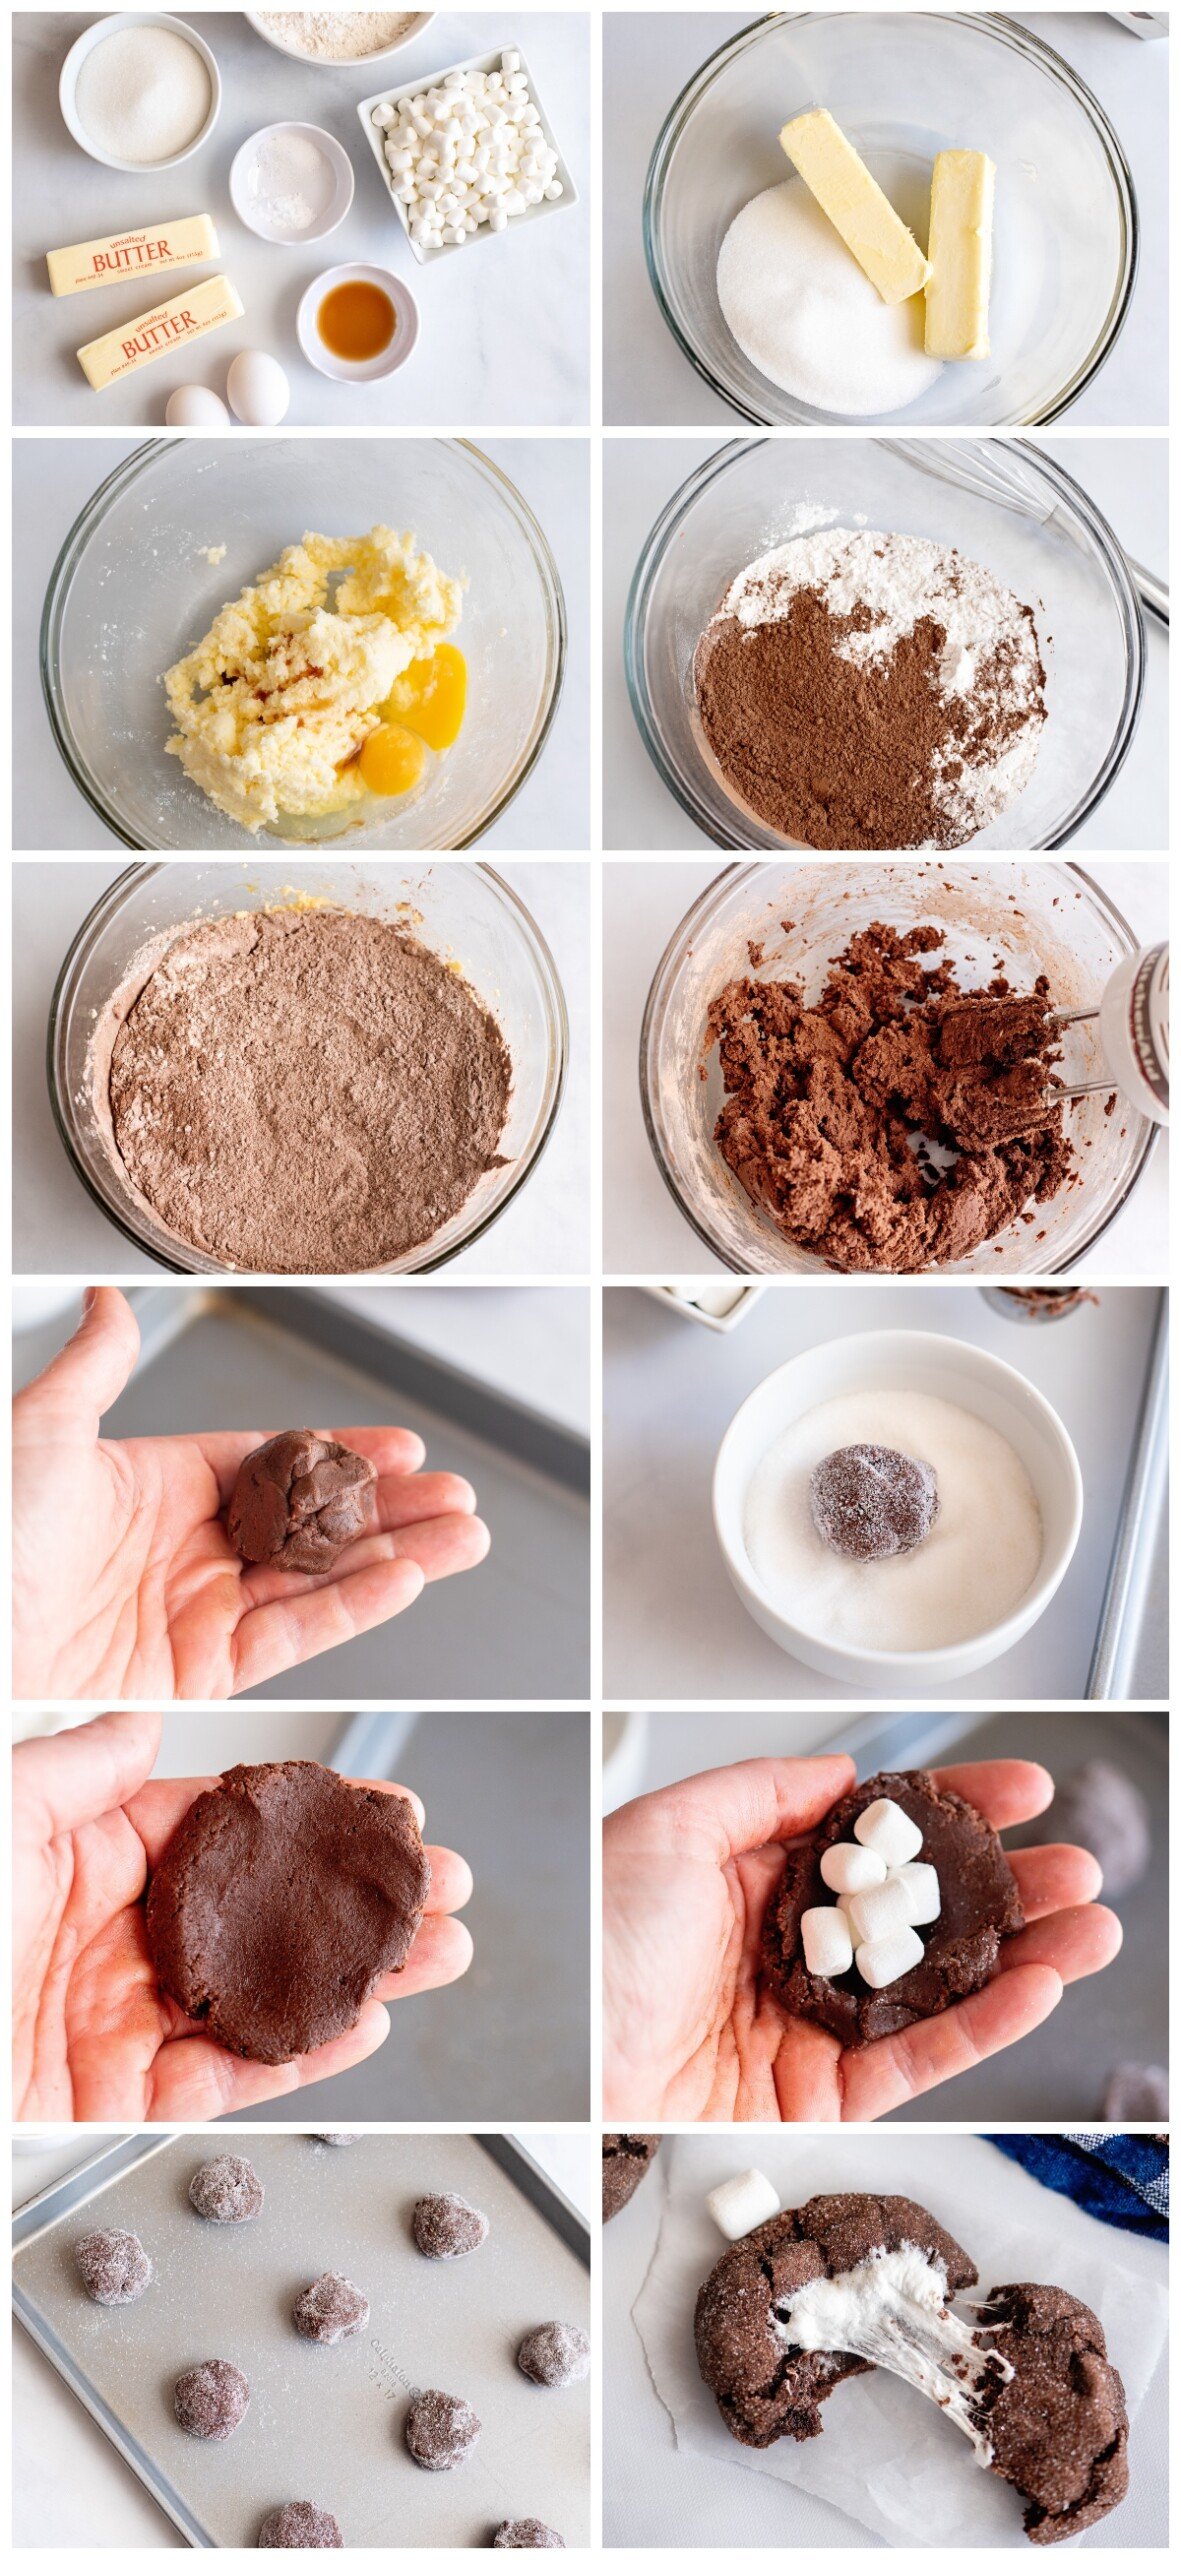 how to chocolate marshmallow cookies step by step photo instructions